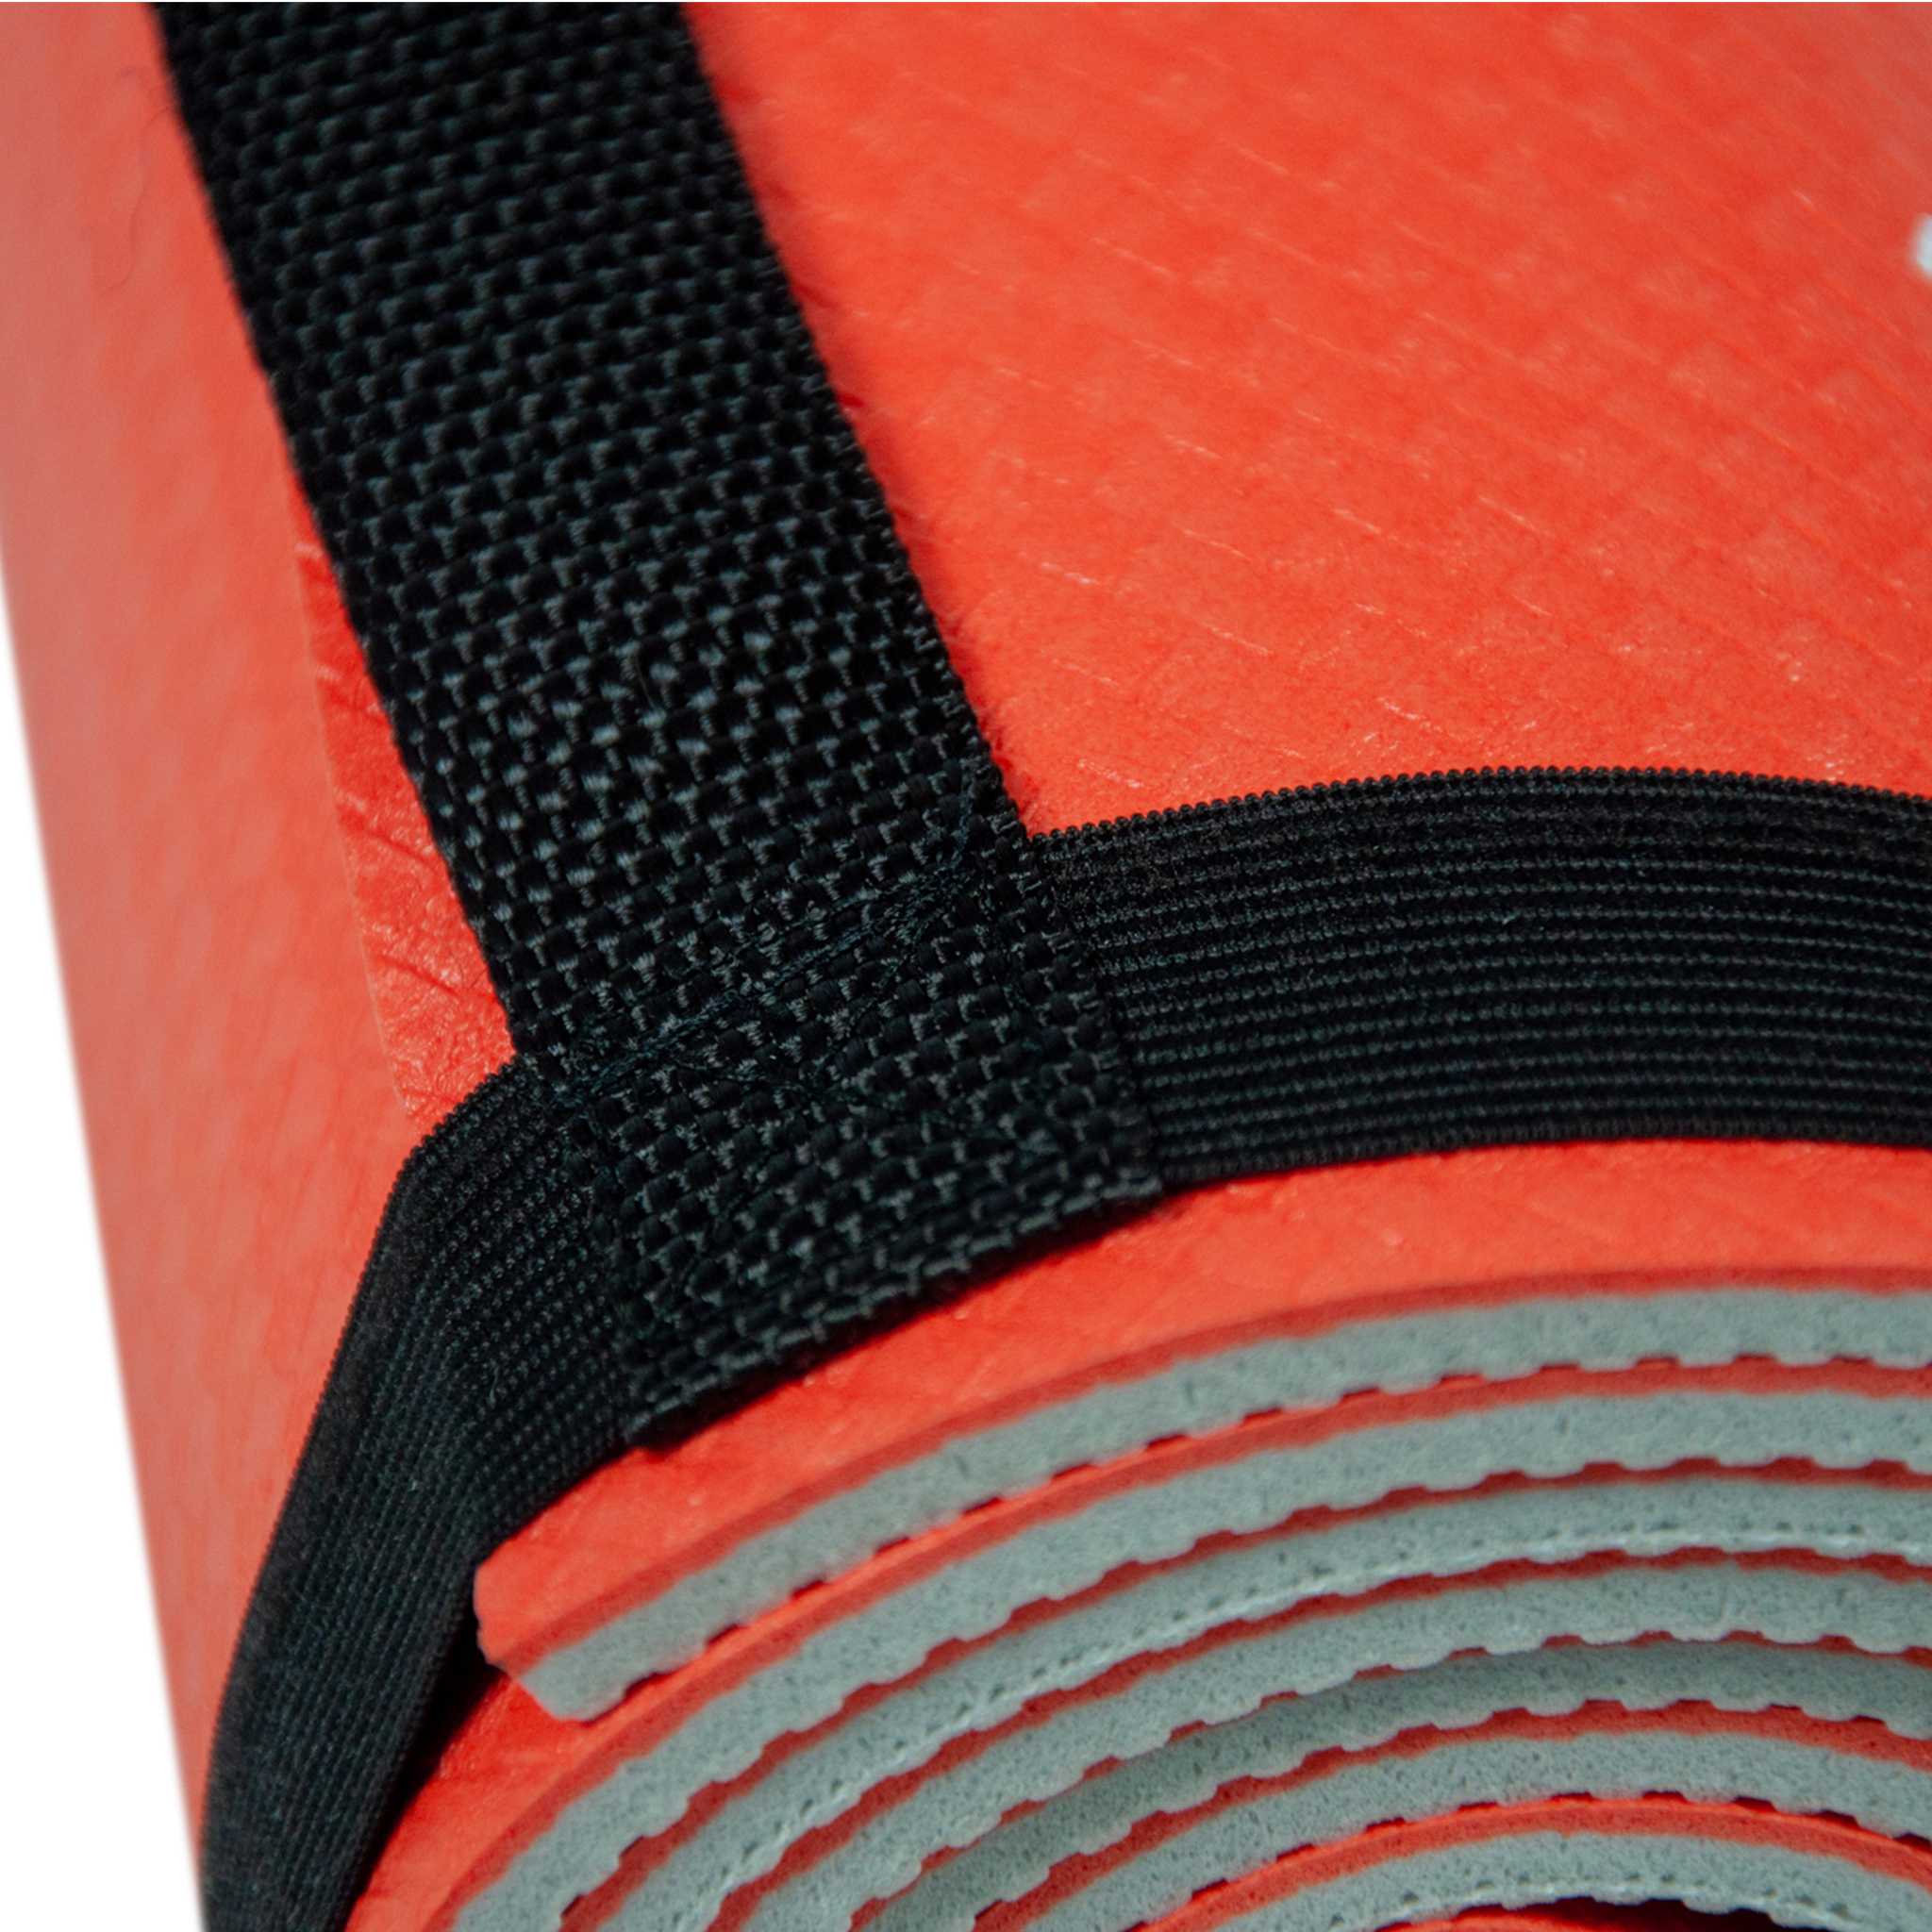 IBF Iron Body Fitness Extra-Thick Yoga Mat - 6 mm (0.24 in.) - Non